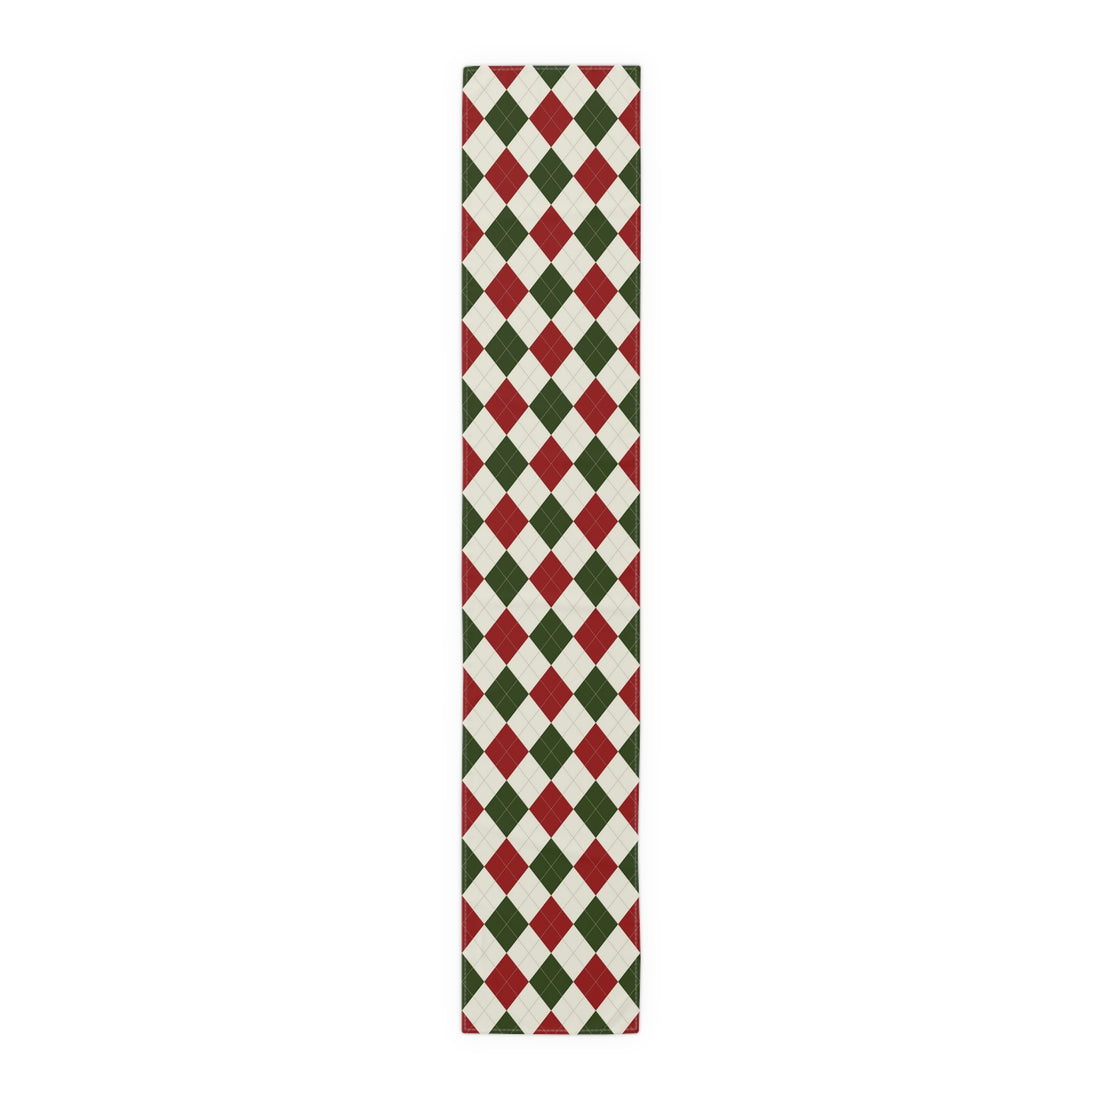 Table Runner (Cotton, Poly) Xmas decor pattern Home-clothes-jewelry